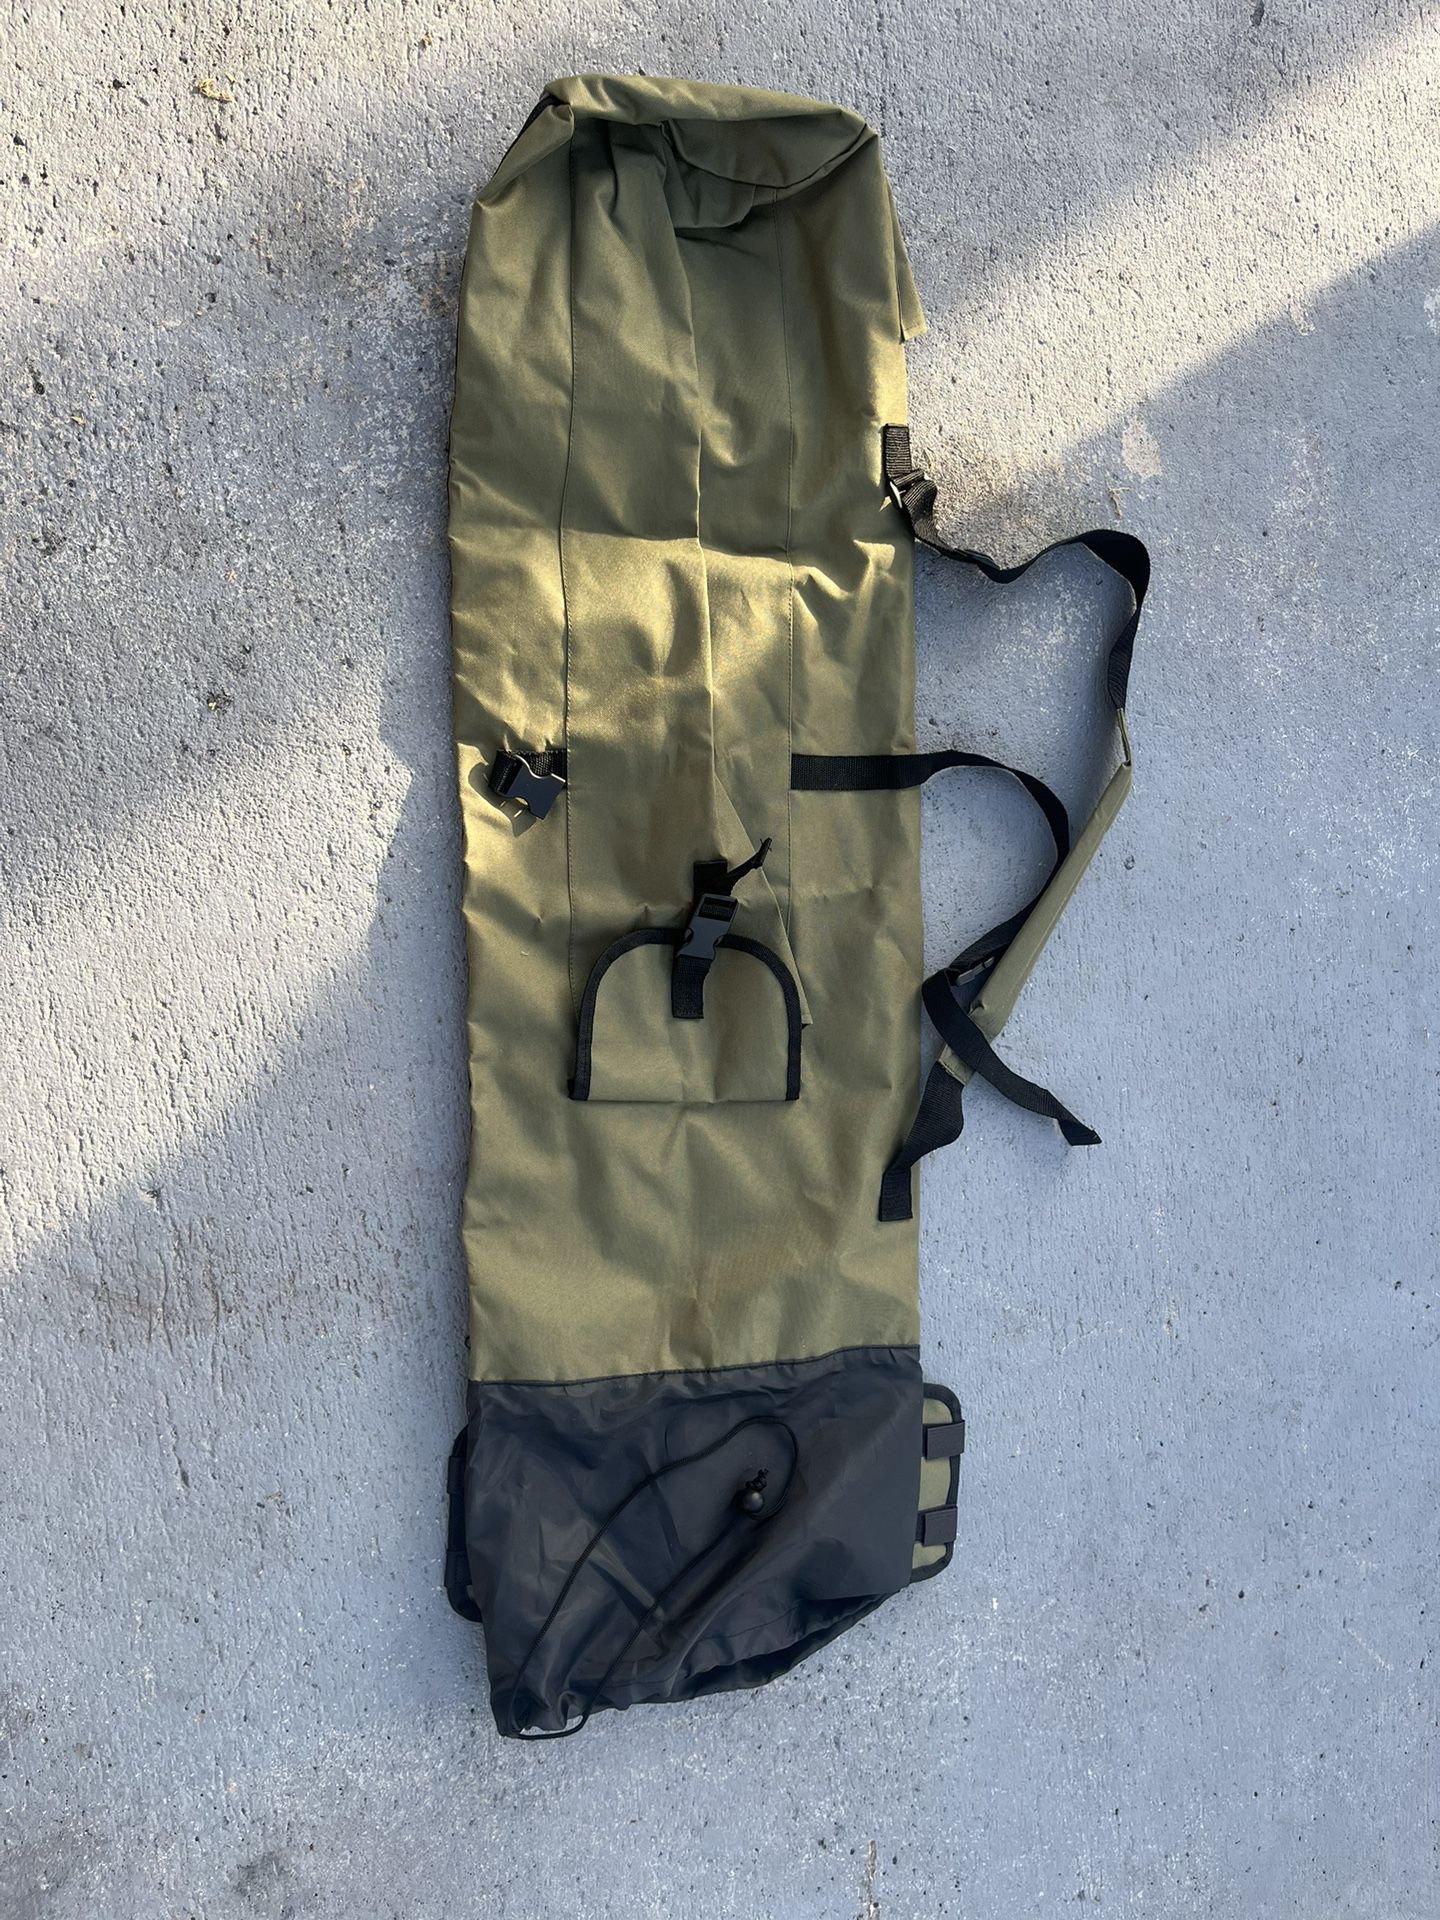 New Never Used Fishing Bag Carrier for Sale in Port St. Lucie, FL - OfferUp